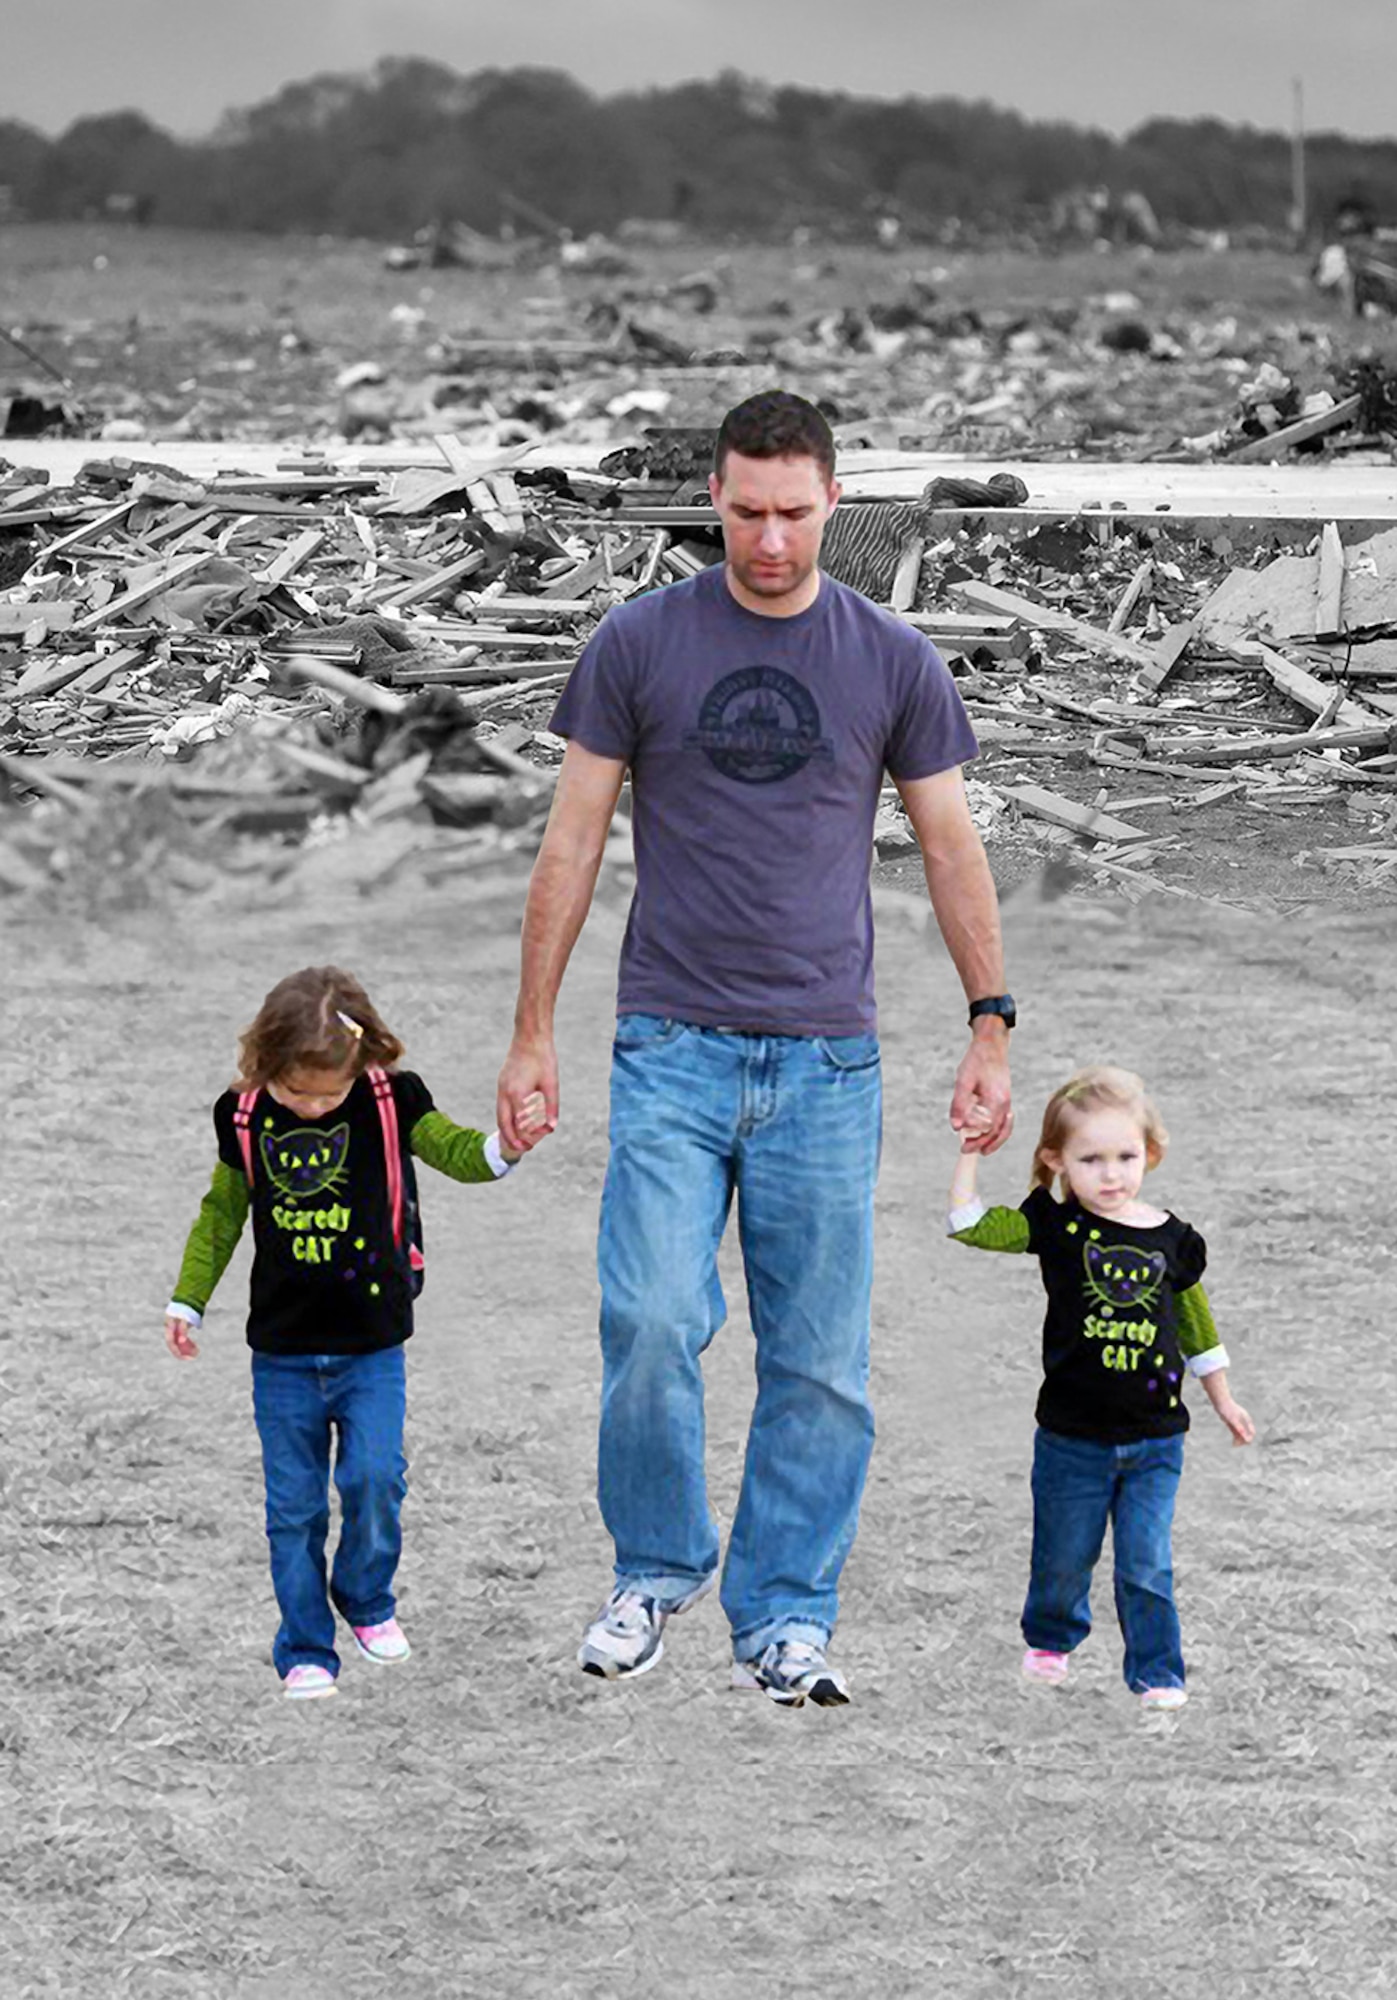 Daddy’s girls through and through, Sydney (left) and Lorelai loved to take walks in the park with their dad, Master Sgt. Dan “Bud” Wassom II. The girls had their lives turned upside down when a tornado hit Vilonia, Ark., April 27, destroying their home and taking their daddy’s life. (photo illustration by David M. Stack)